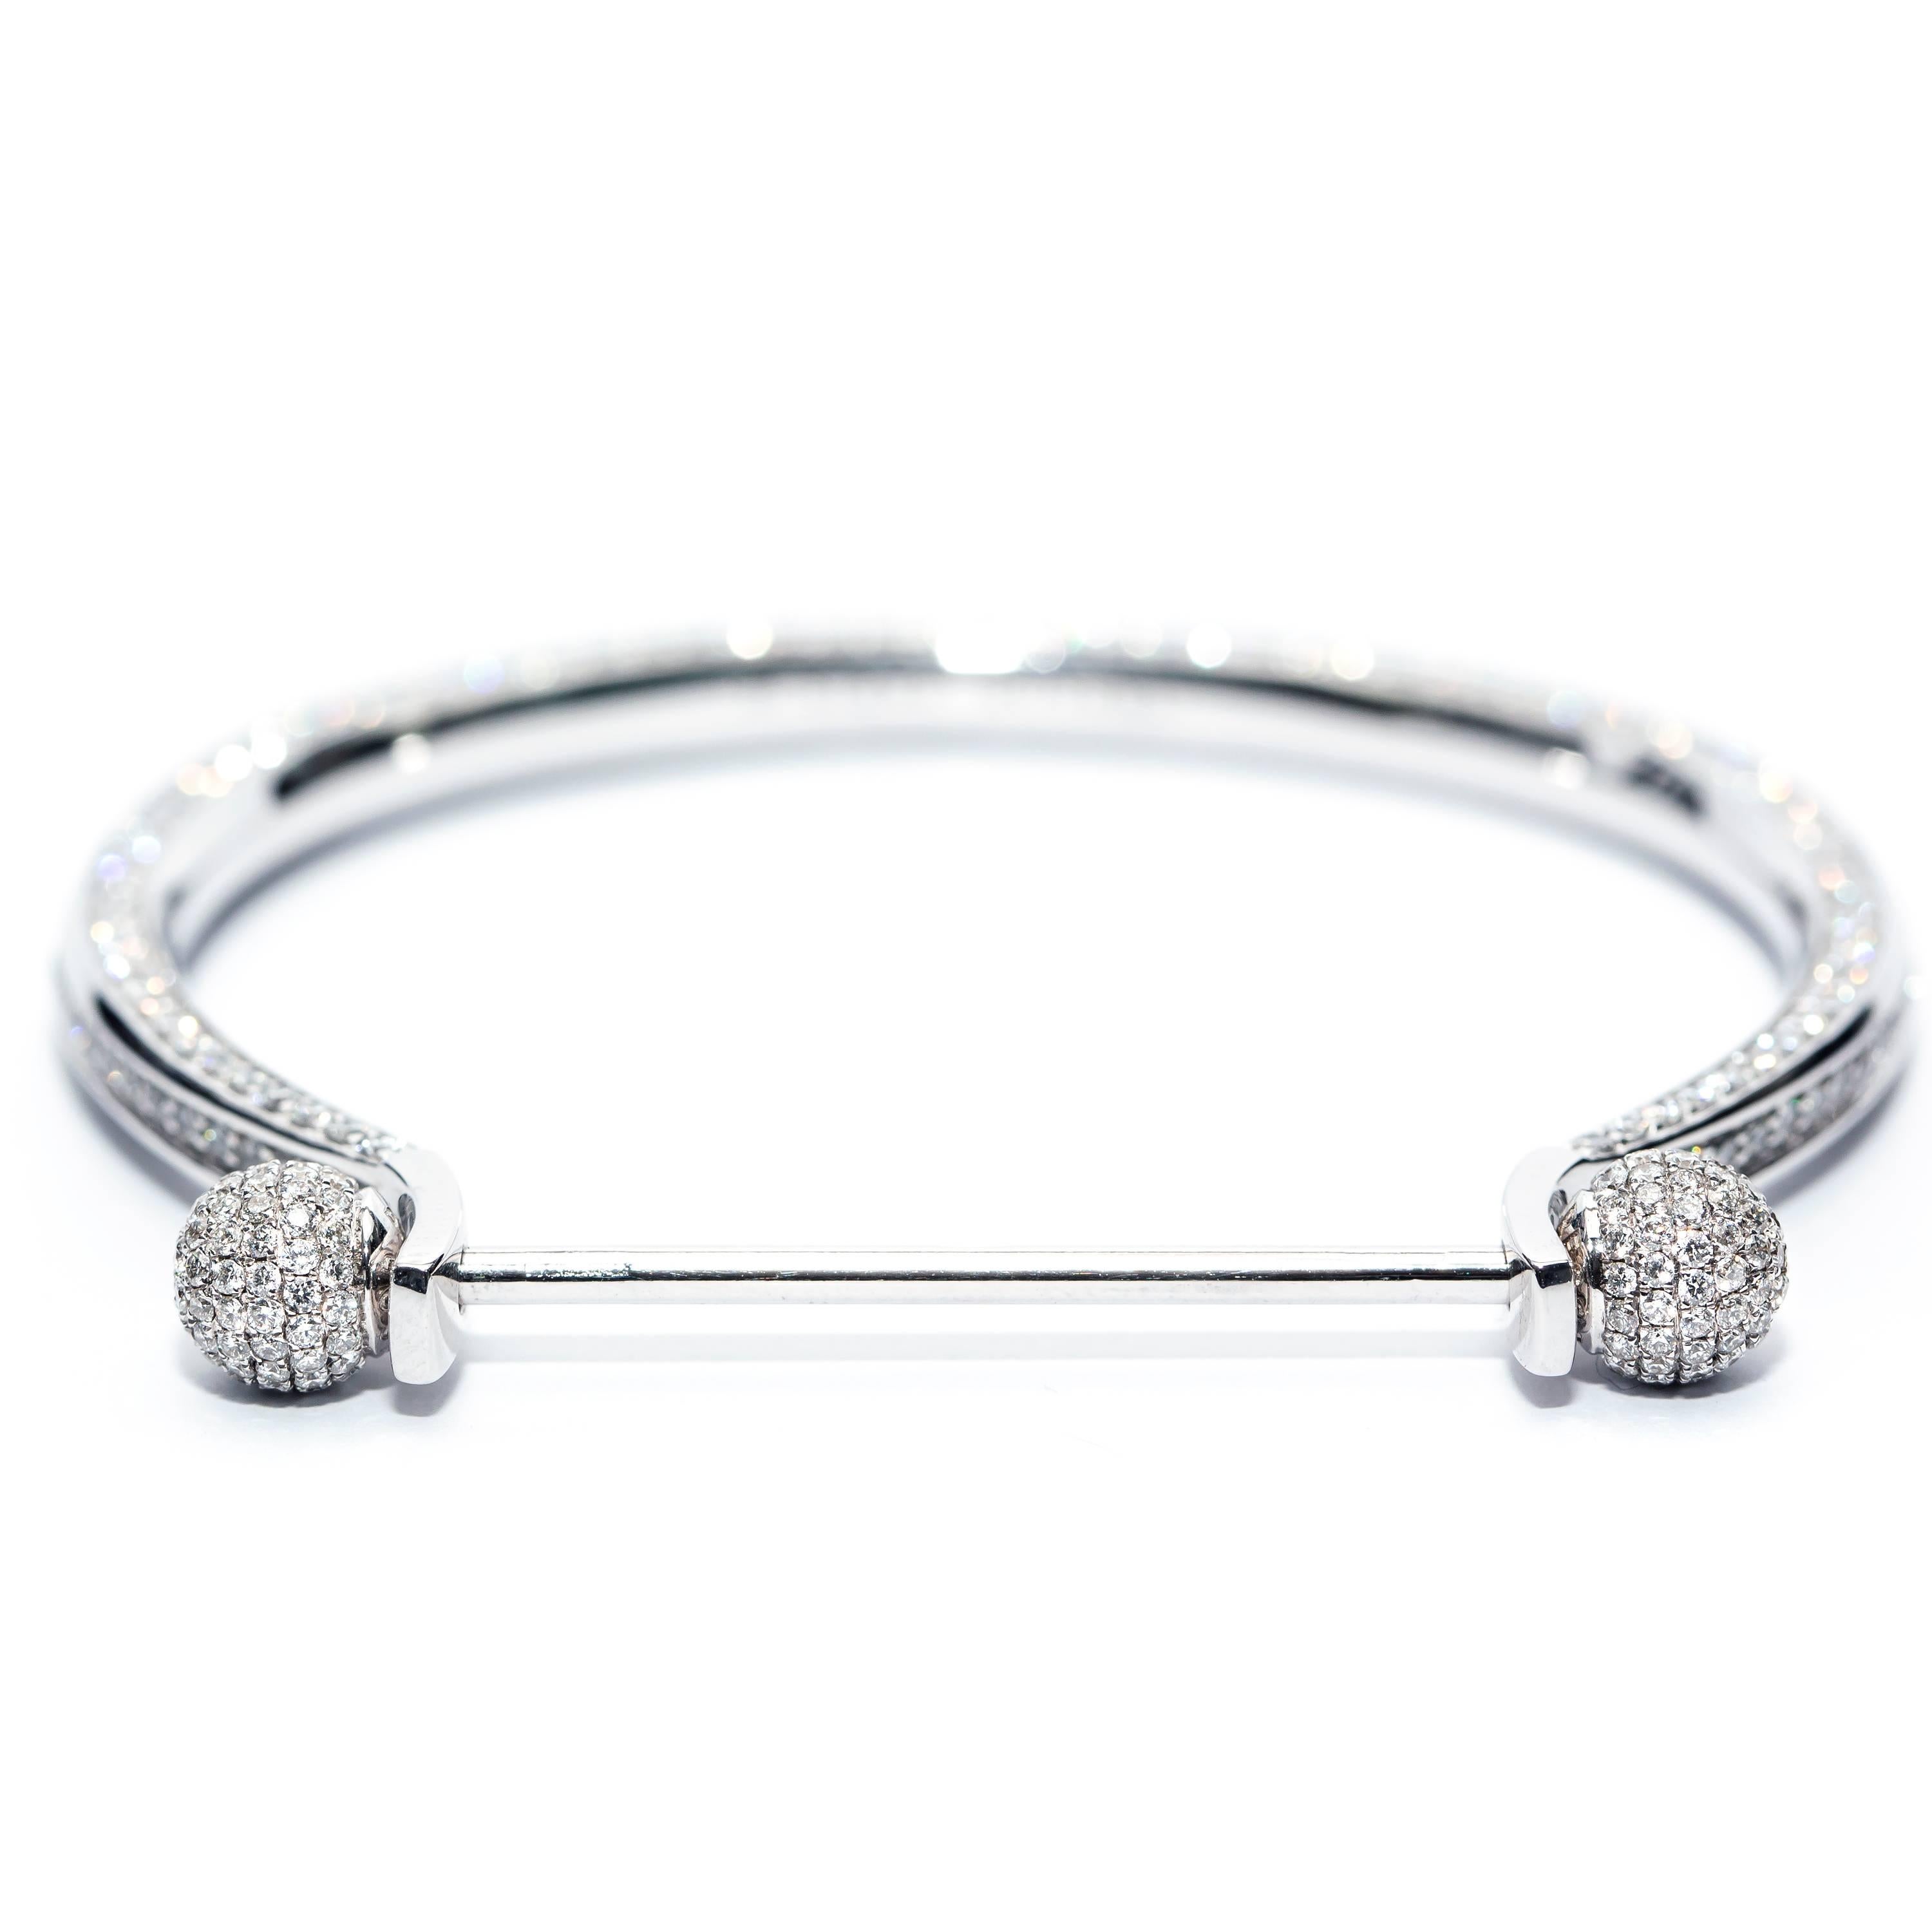 This deluxe Eternal Bangle crafted in 4.00 Carats of H -SI1 Round Diamonds for a heavy weight luxury feel featuring sphere ends on a screw fix bar which enables you to add charms and interchange the end fittings. Set in 18 Karat White Gold to create